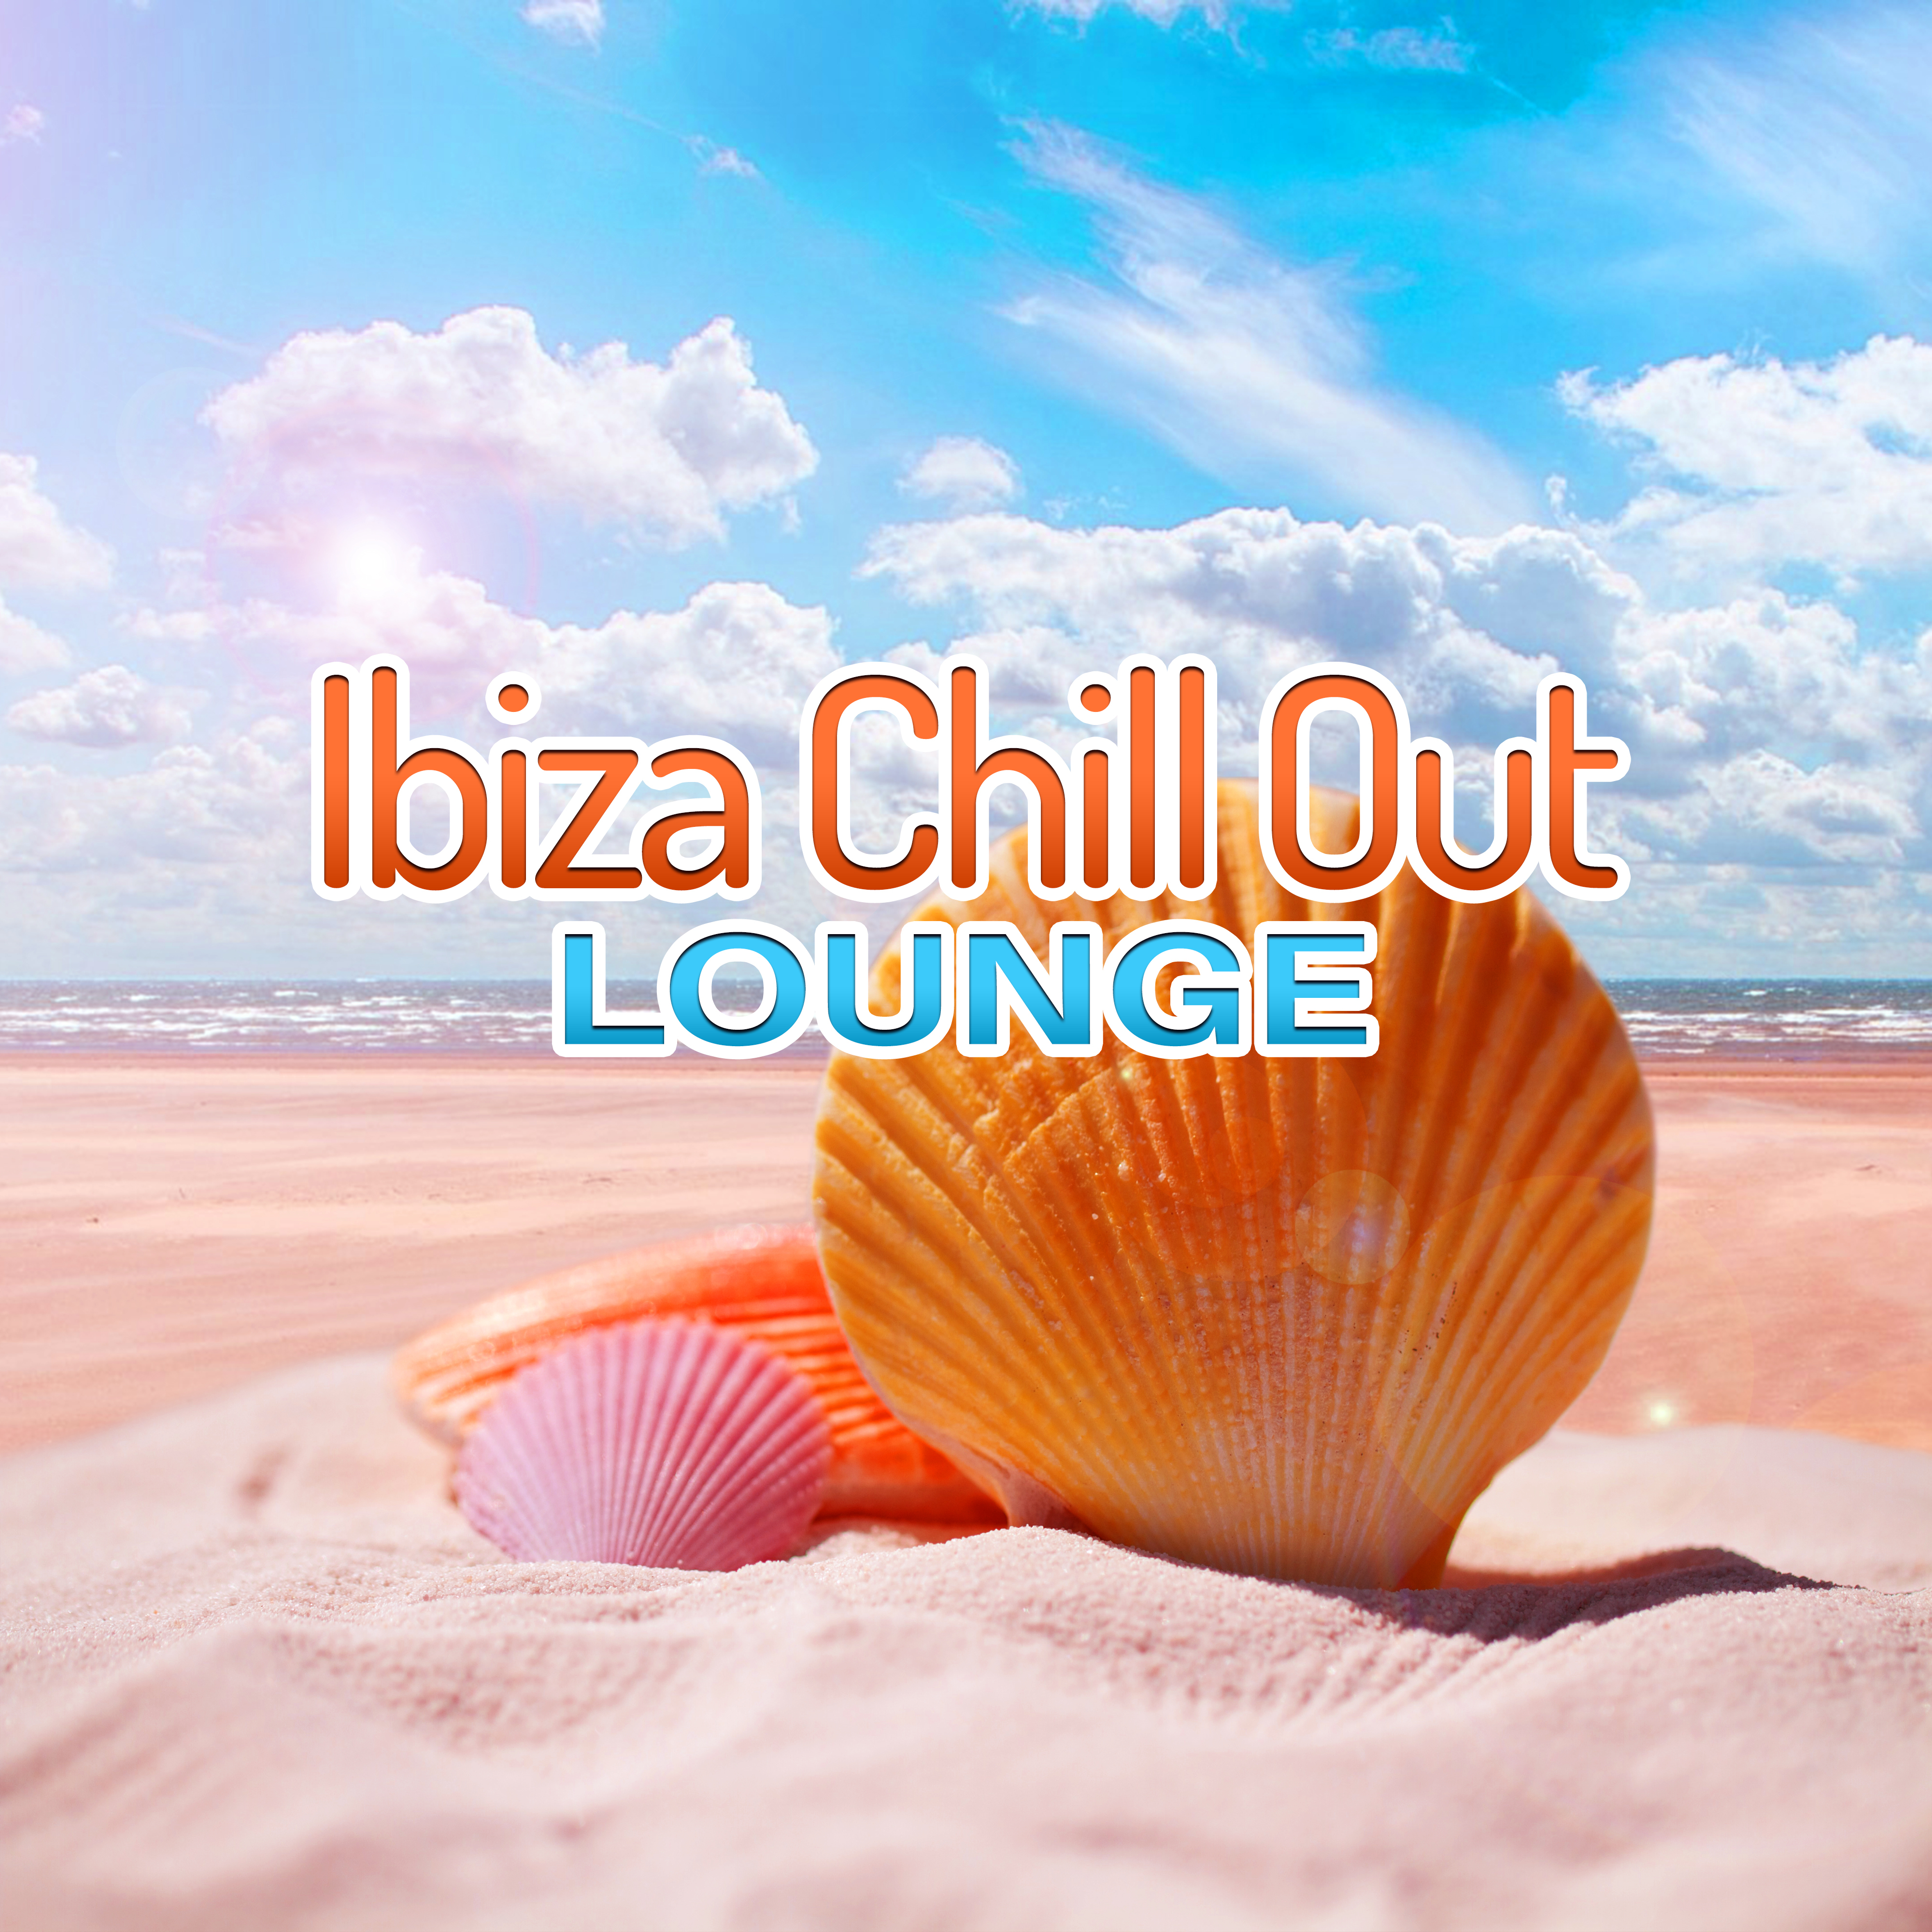 Ibiza Chill Out Lounge  Calm Sounds to Rest, Ibiza Relaxation, Beach Lounge, Summer 2017